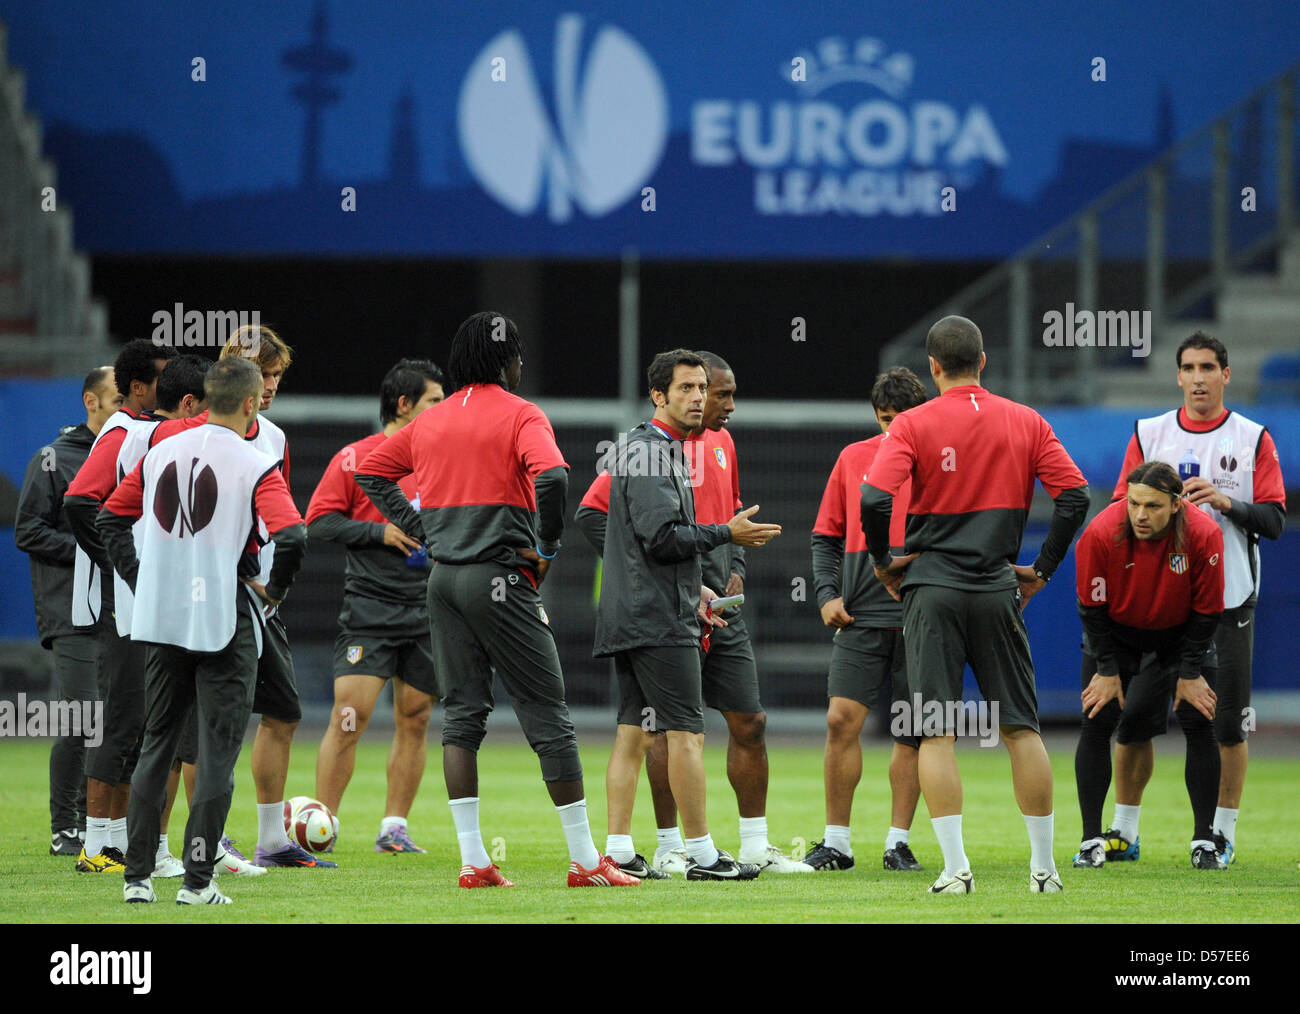 Atletico Madrid's head coach Quique Sanchez Flores (C) talks to his team during the final training session at HSH Nordbank Arena in Hamburg, Germany, 11 May 2010. Spanish side Atletico Madrid will face English side FC Fulham in the UEFA Europa League final in Hamburg on 12 May 2010. Photo: Marcus Brandt Stock Photo